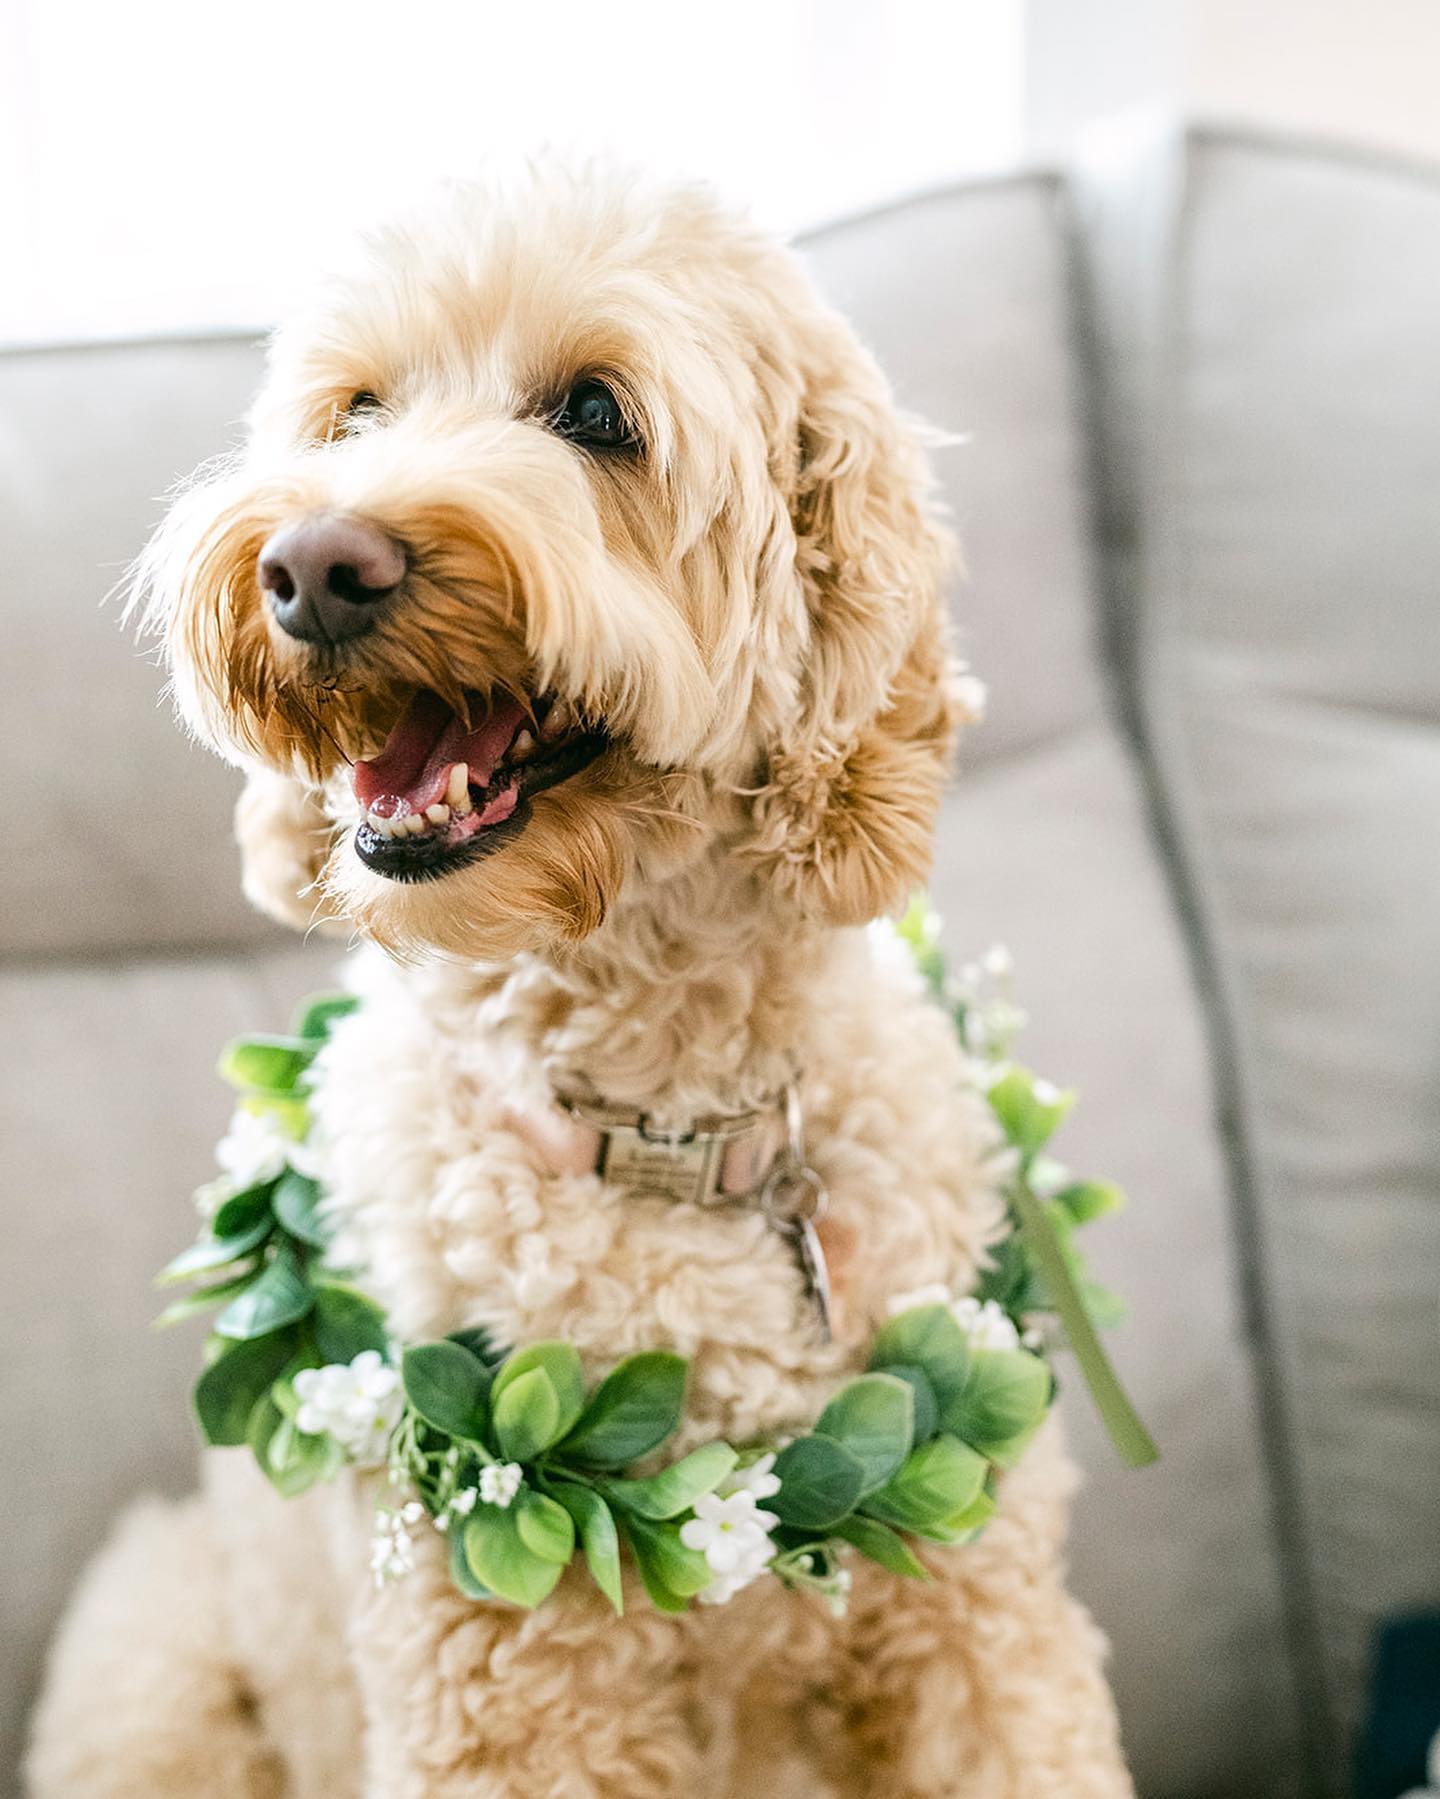 an adorable image of a pet dog with flowery accessories 